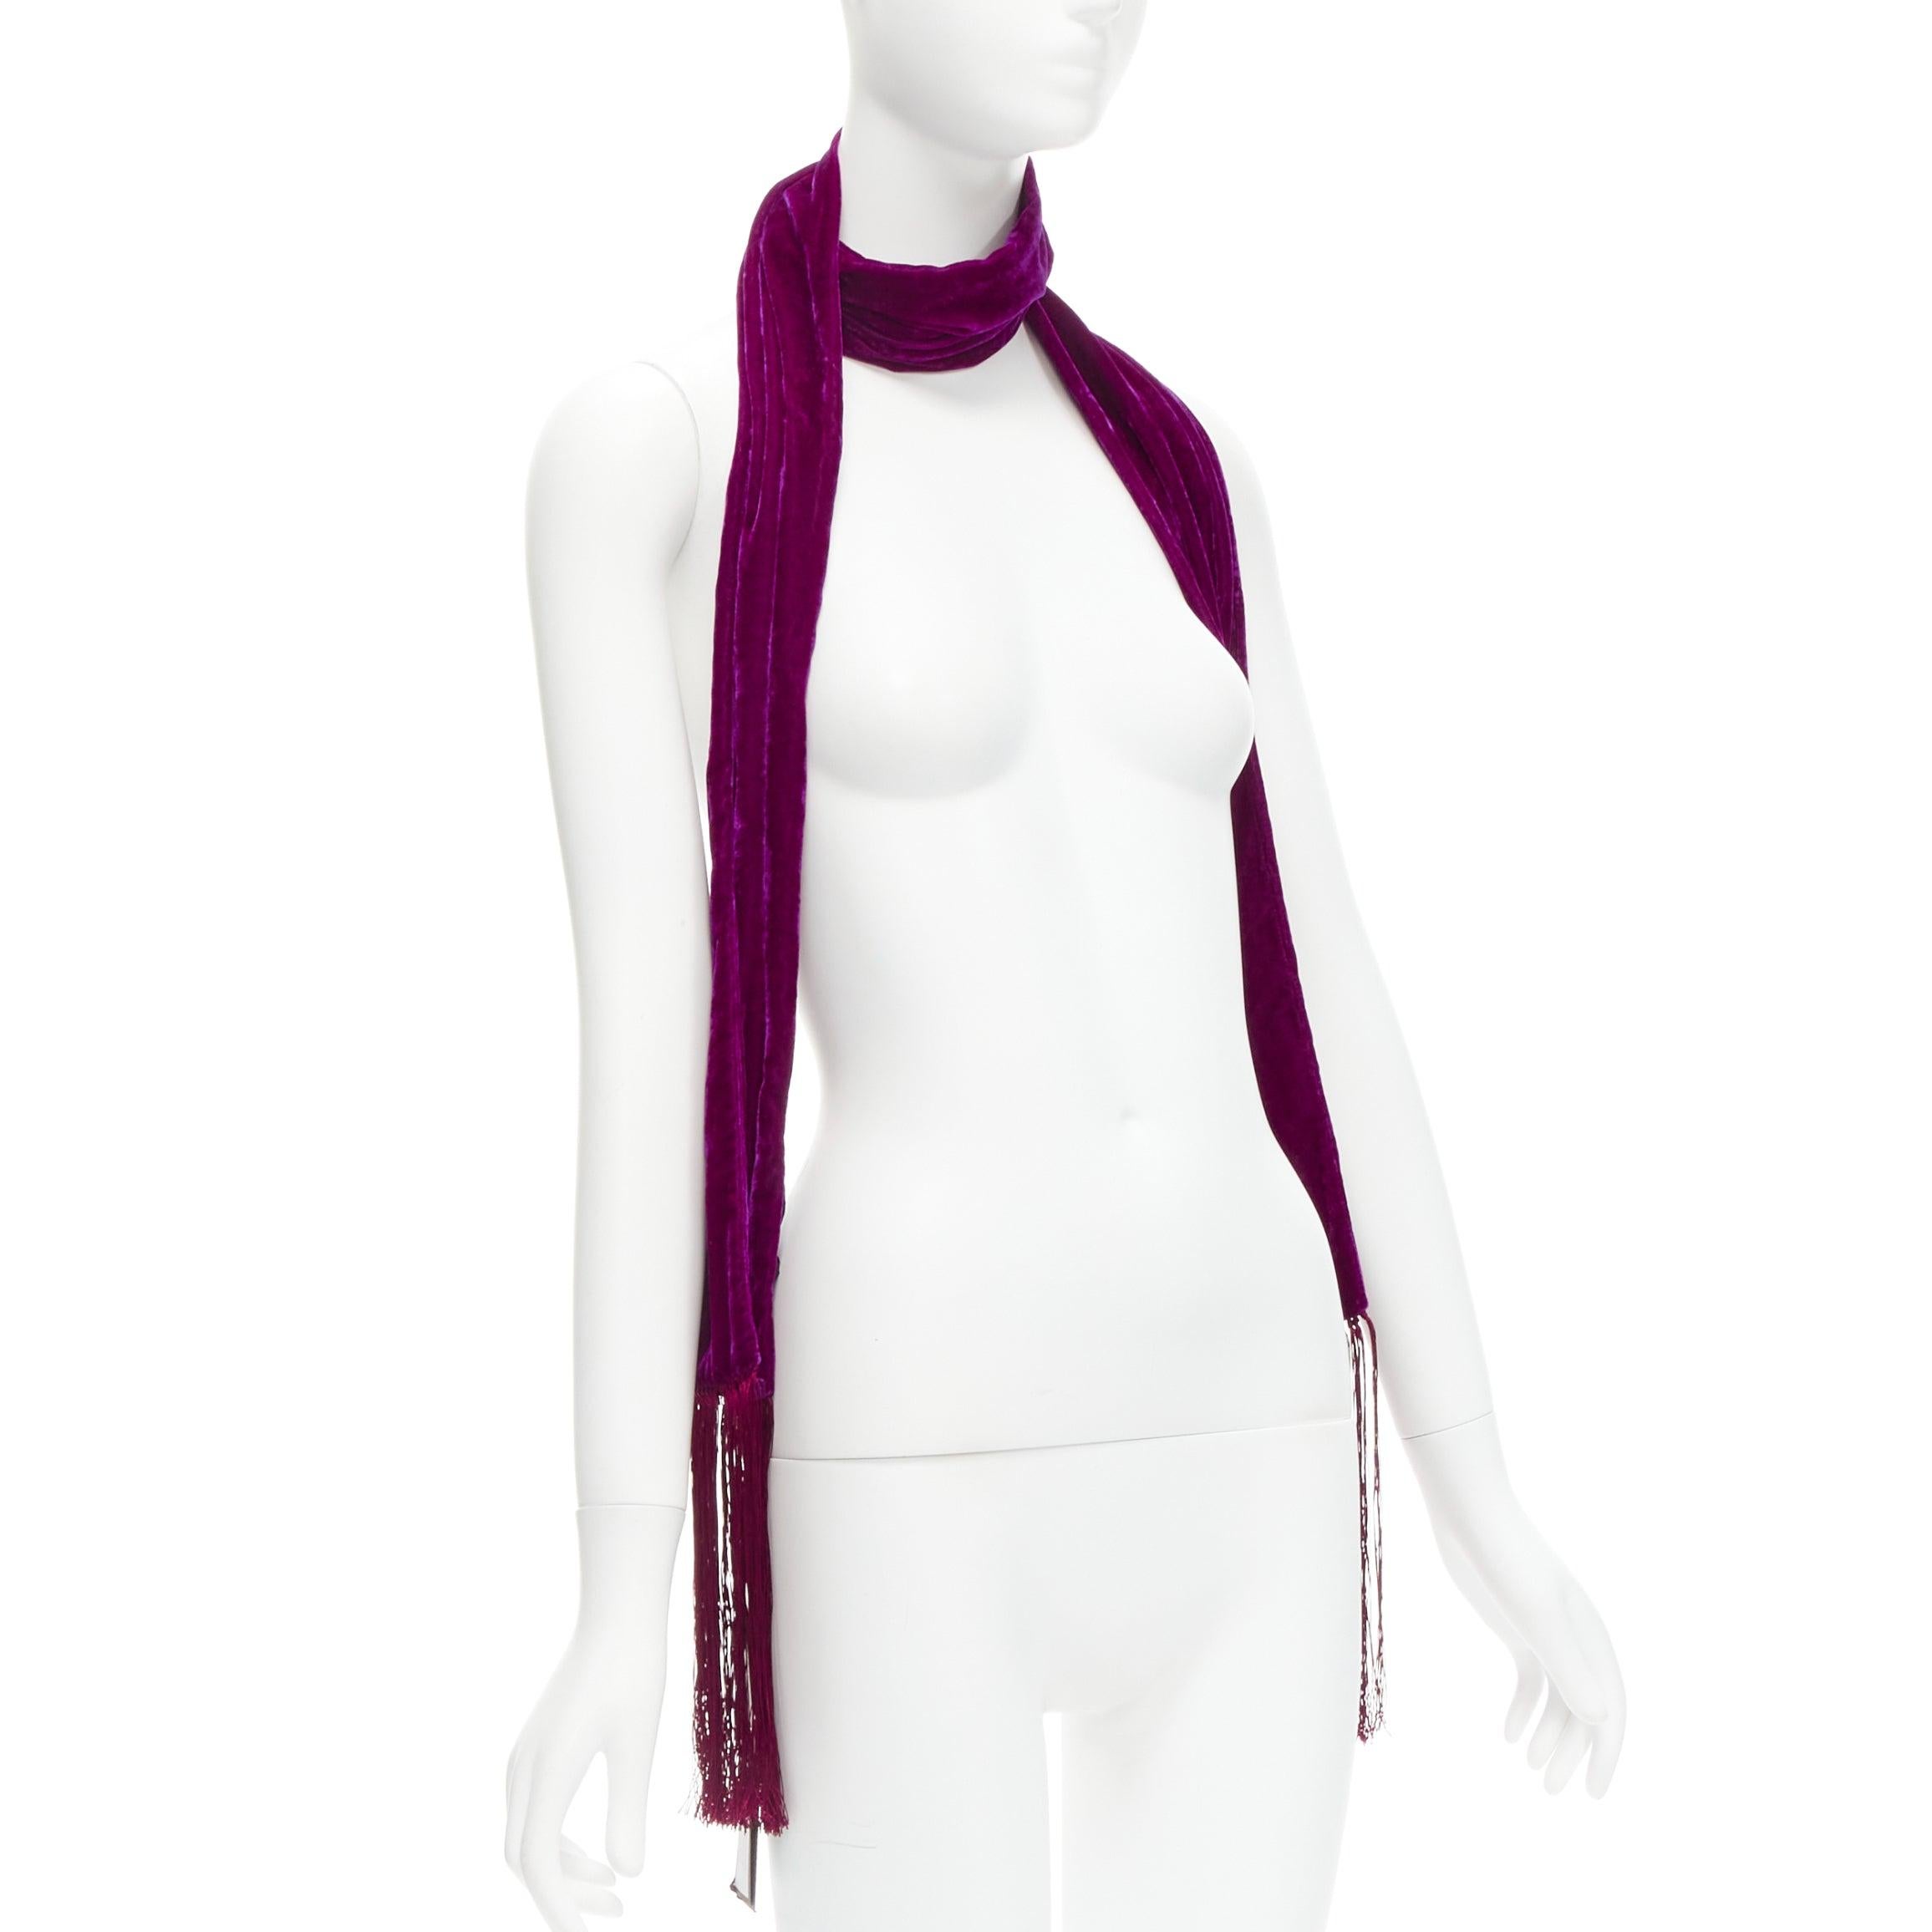 HAIDER ACKERMANN pink crushed velvet burgundy fringe trim scarf
Reference: BSHW/A00132
Brand: Haider Ackermann
Designer: Haider Ackermann
Material: Rayon, Blend
Color: Pink, Burgundy
Pattern: Solid
Made in: Italy

CONDITION:
Condition: Unworn in